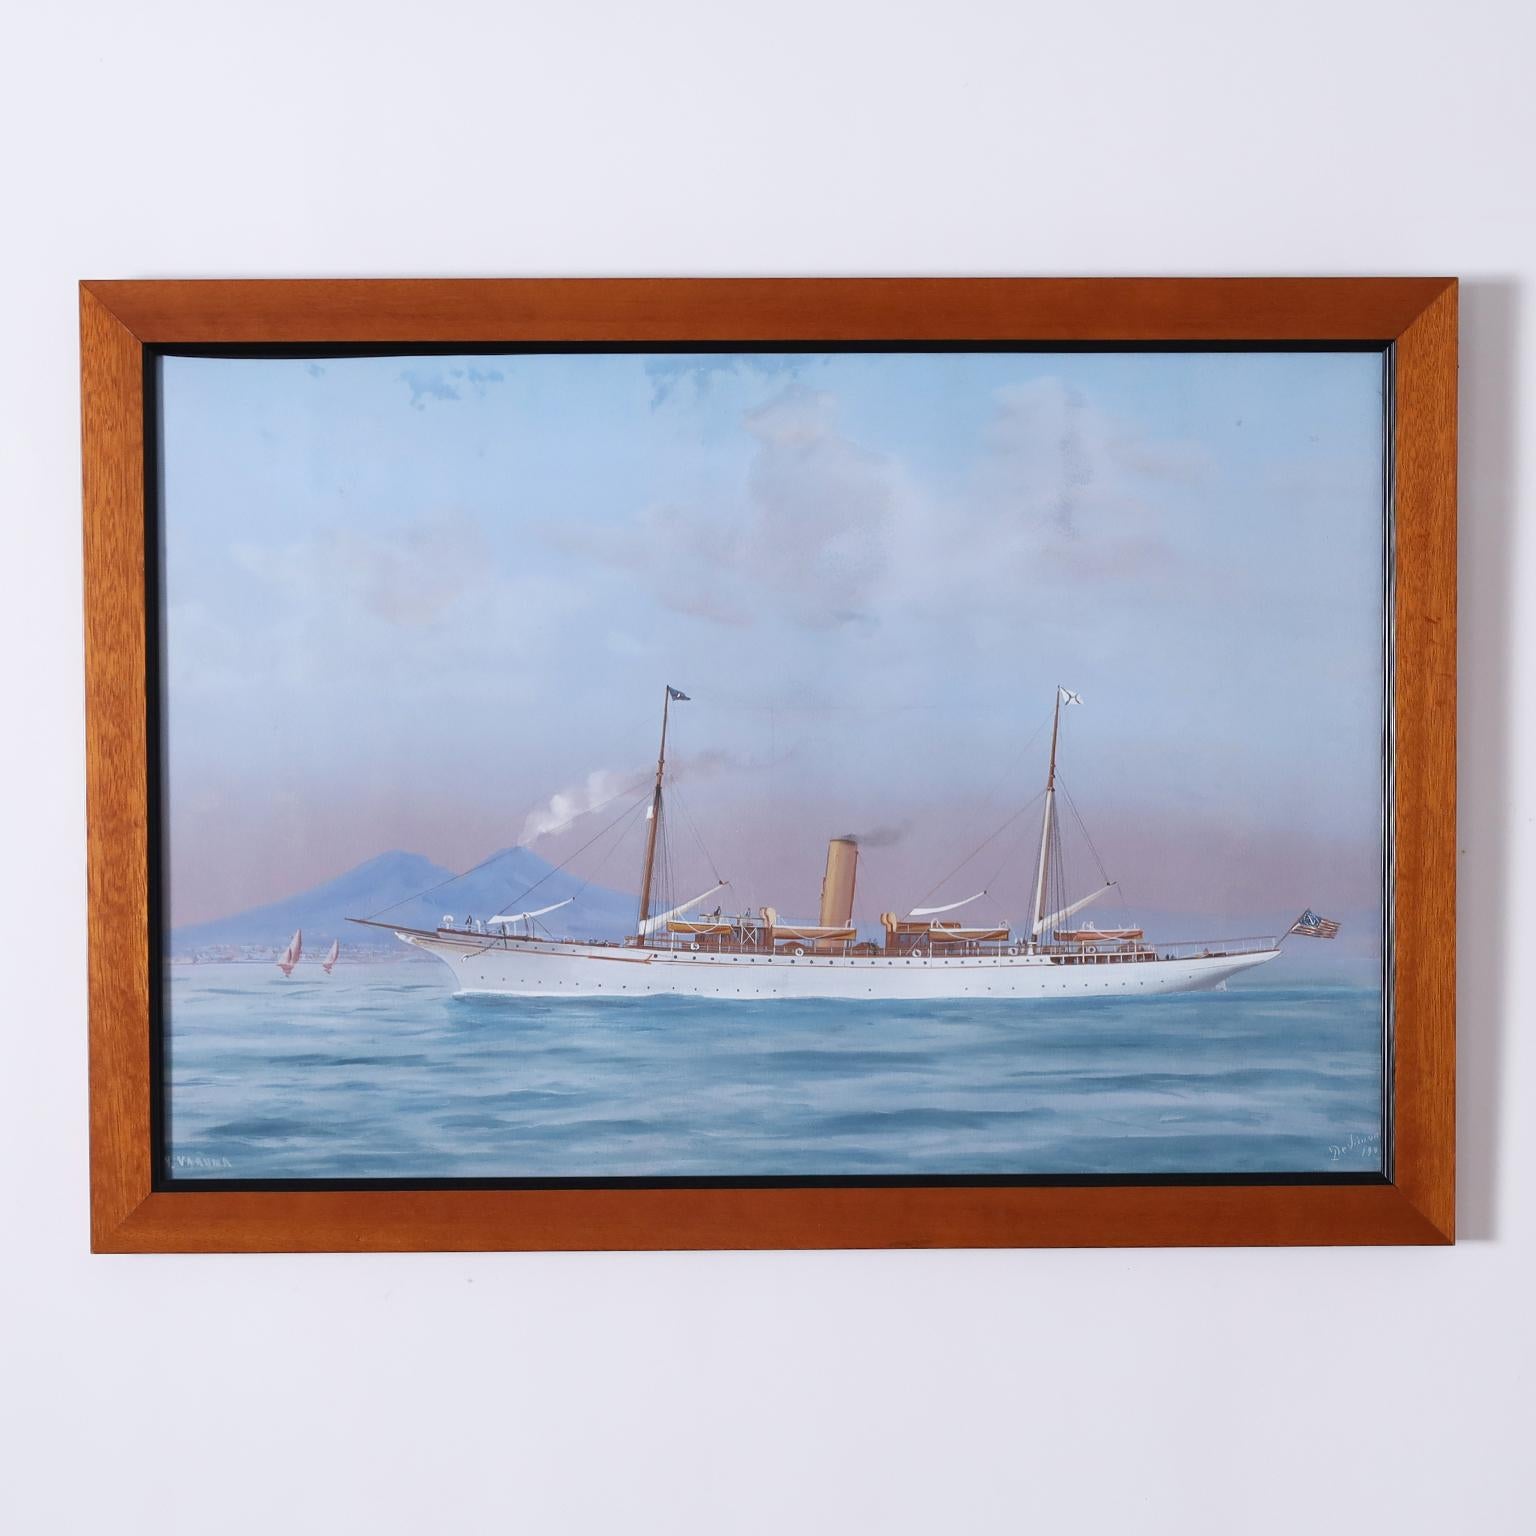 Antique painting of a steam powered yacht, flying the American flag and named "Varuna" on the Mediterranean sea with Mt. Vesuvius in the background. Executed in gouache by the noted Italian marine artist Antonio De Simone in 1900. Presented in a